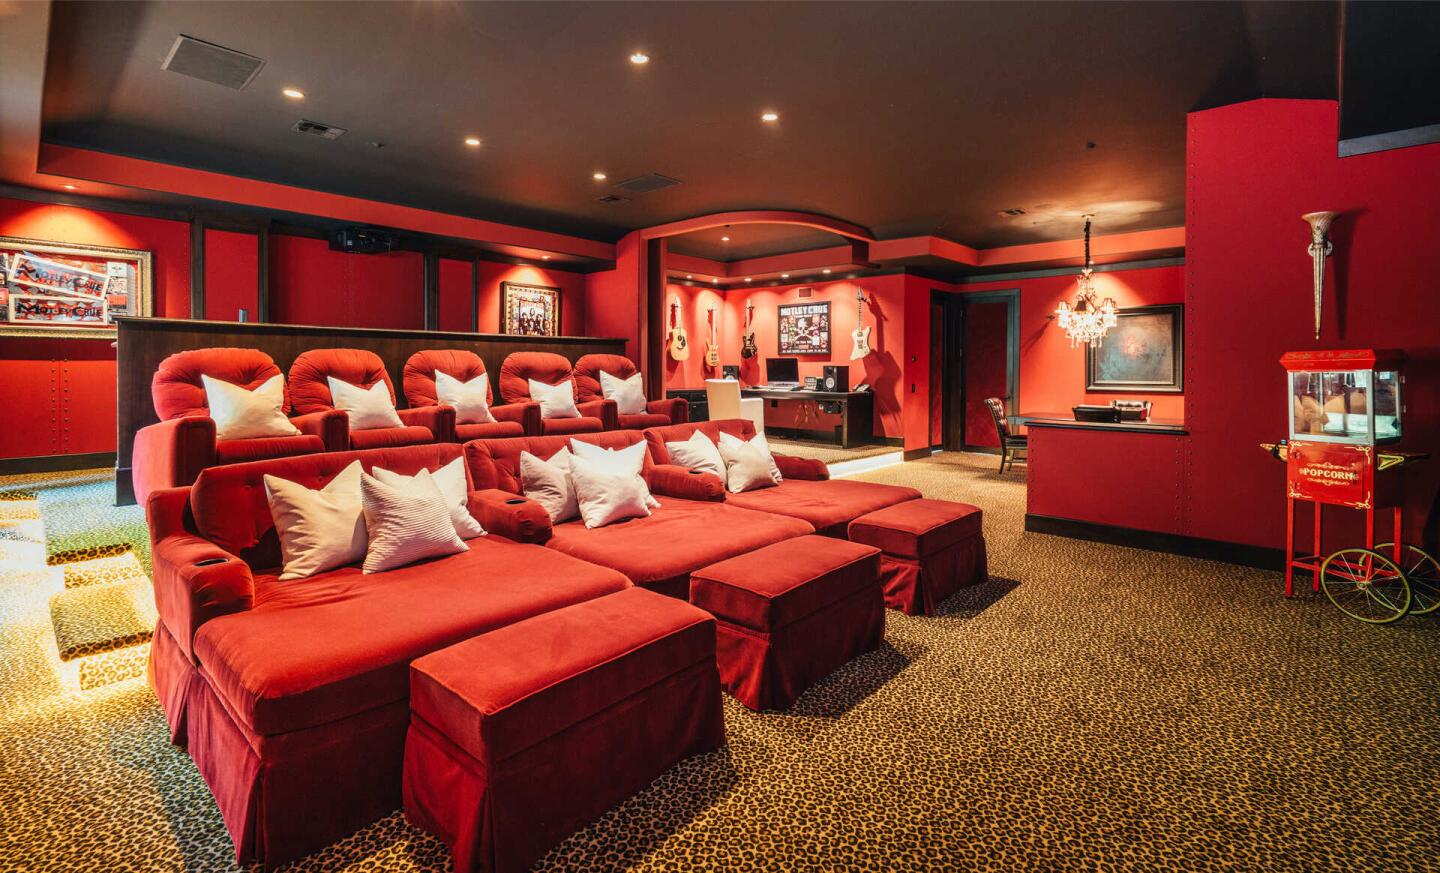 The custom home includes a library, billiards room and crimson-colored movie theater with cheetah-print carpet.